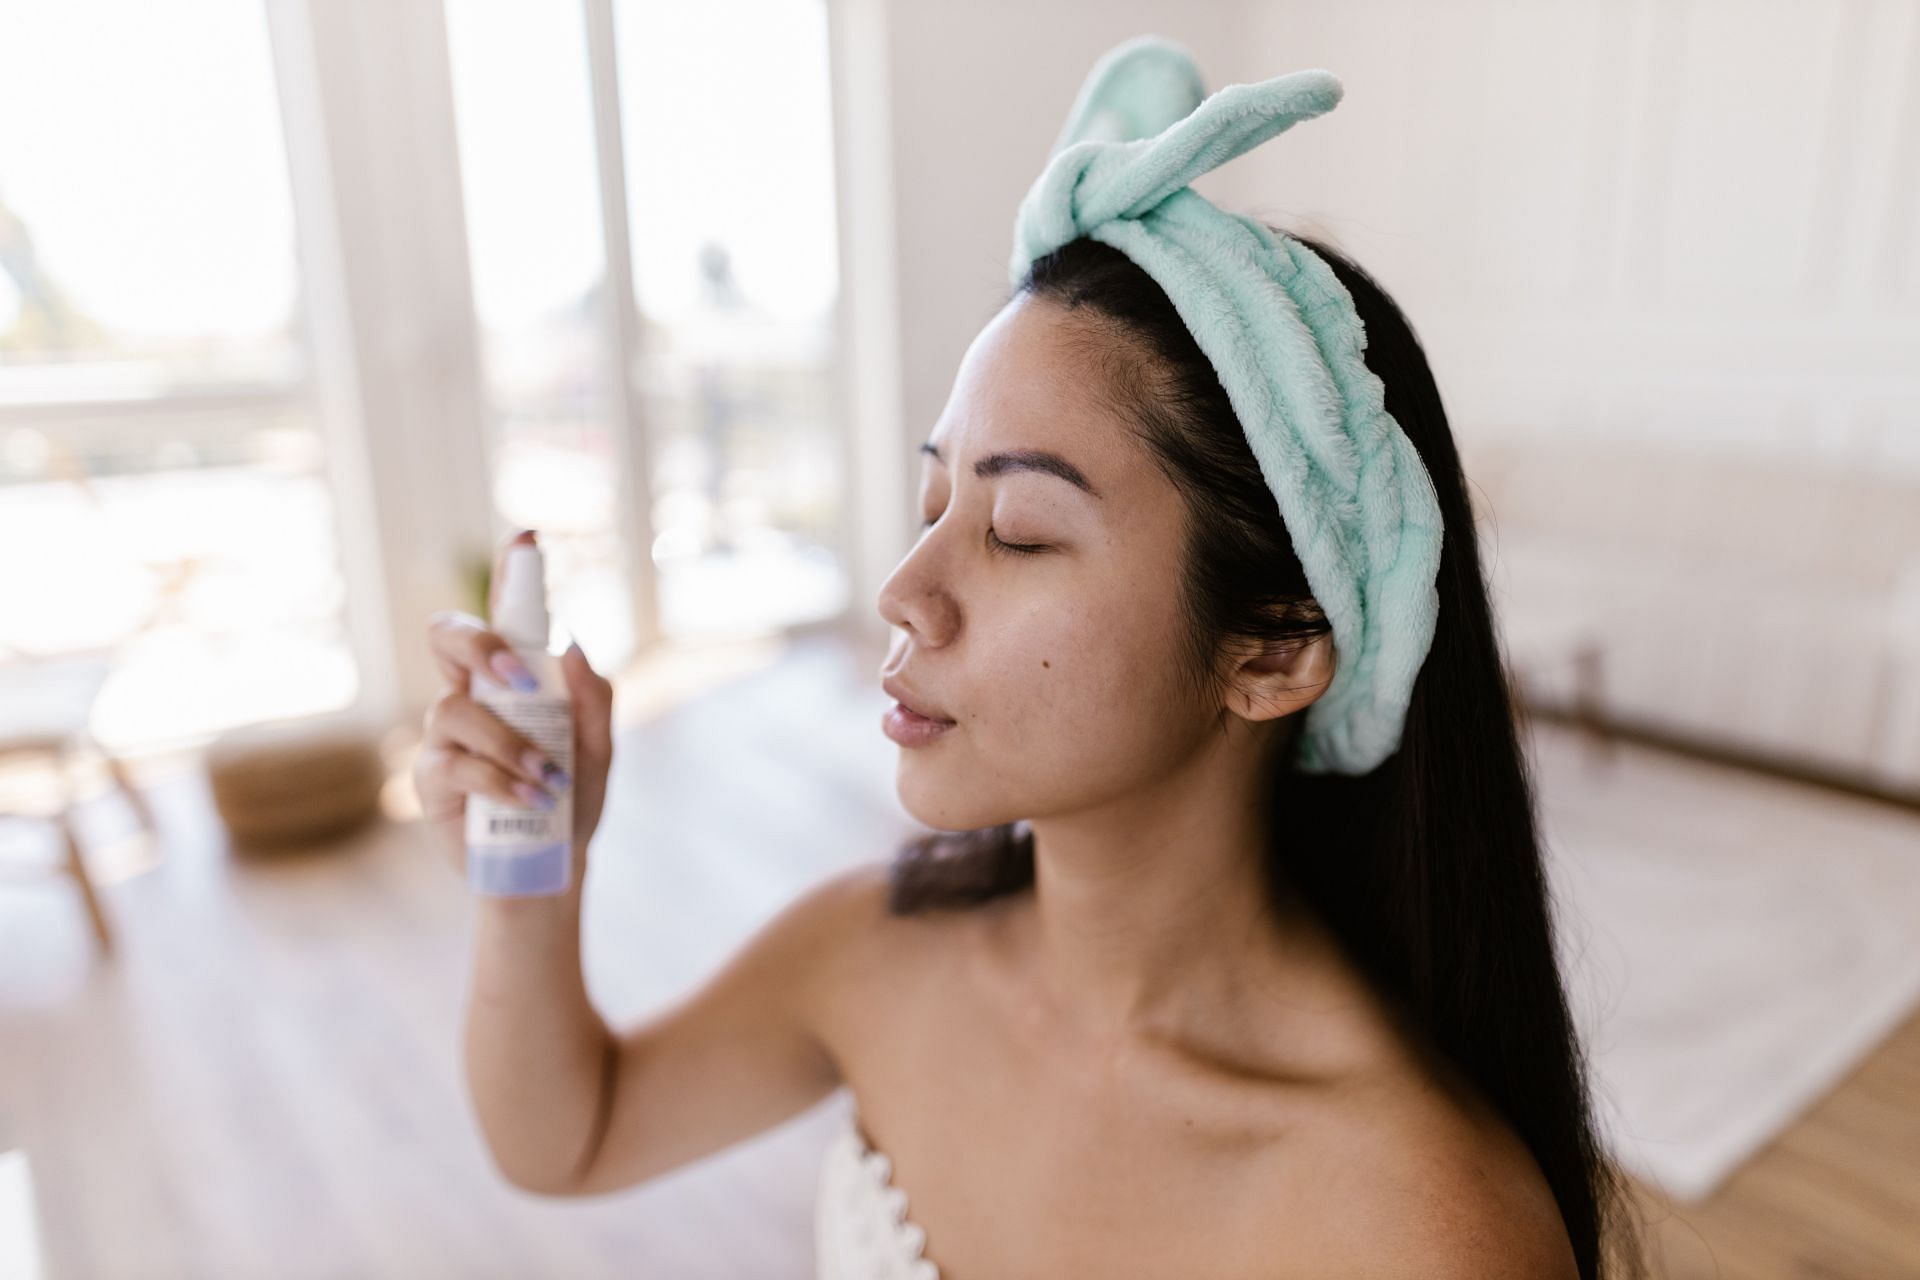 Micellar water acts as a gentle cleanser. (Image via Pexels/Rodnae Productions)